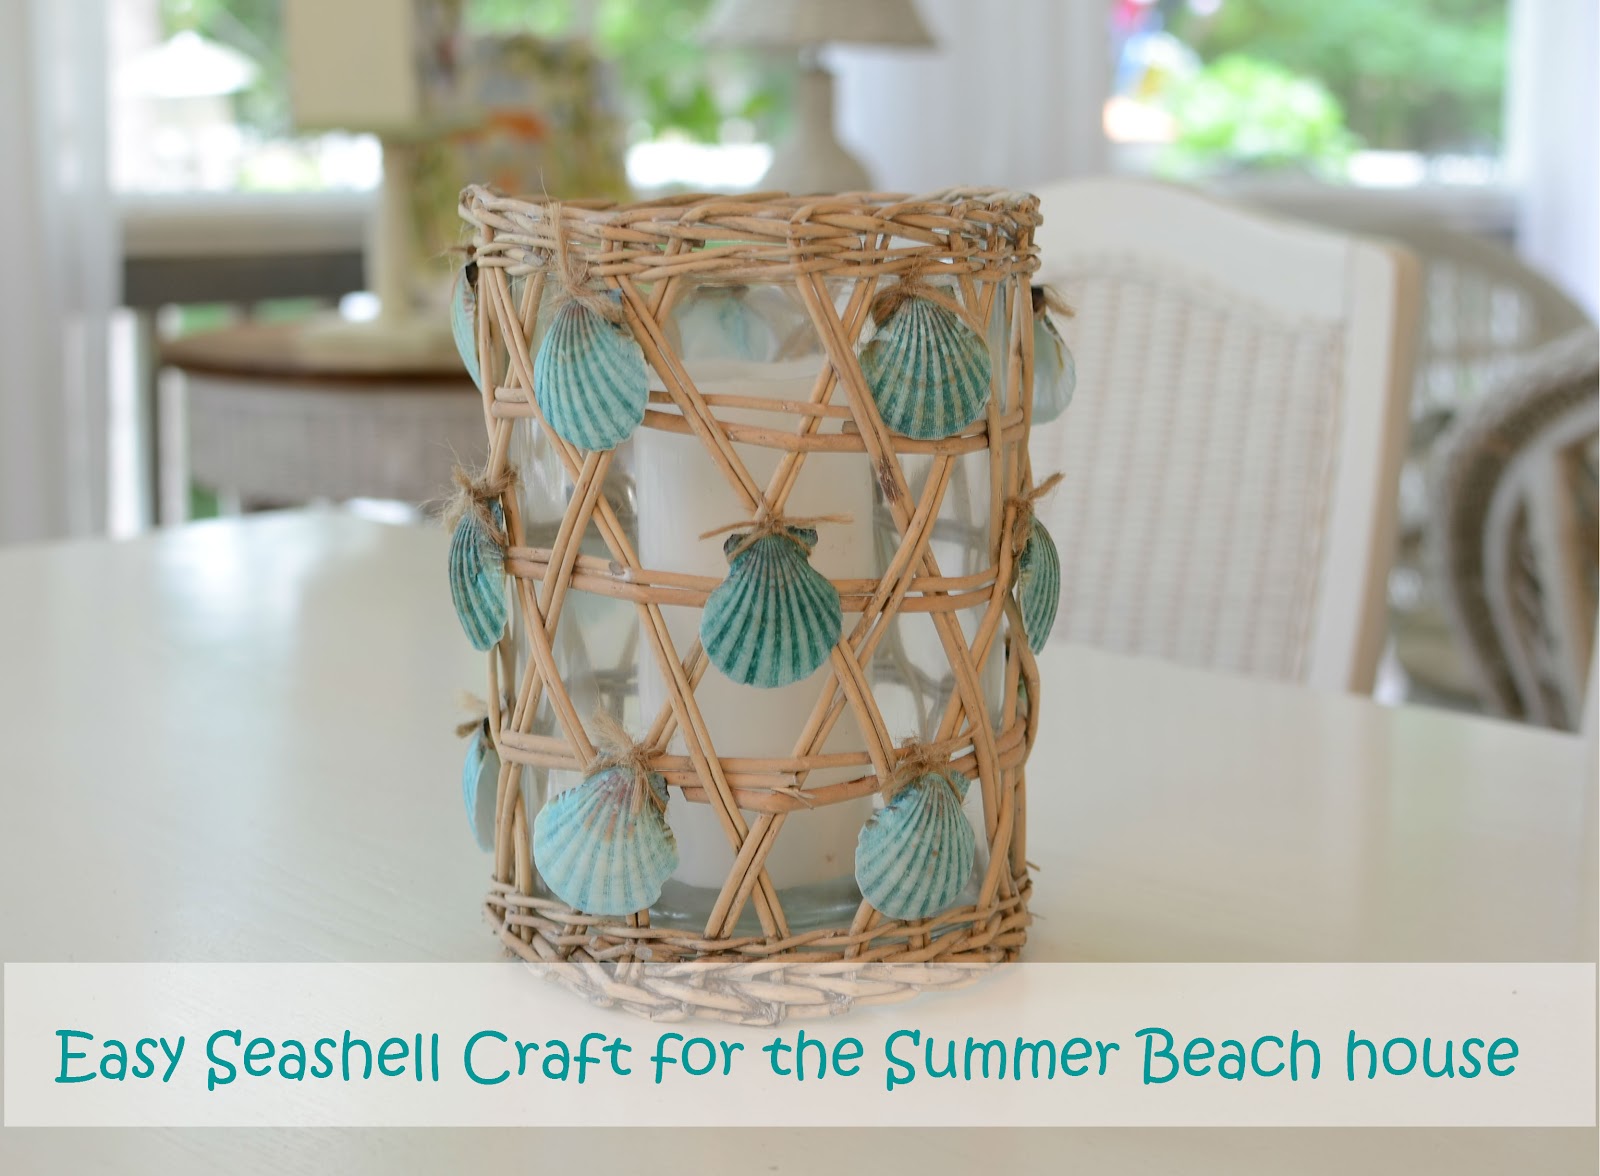 Seashell Crafts for Your Nautical Beach House Decor – Between Naps